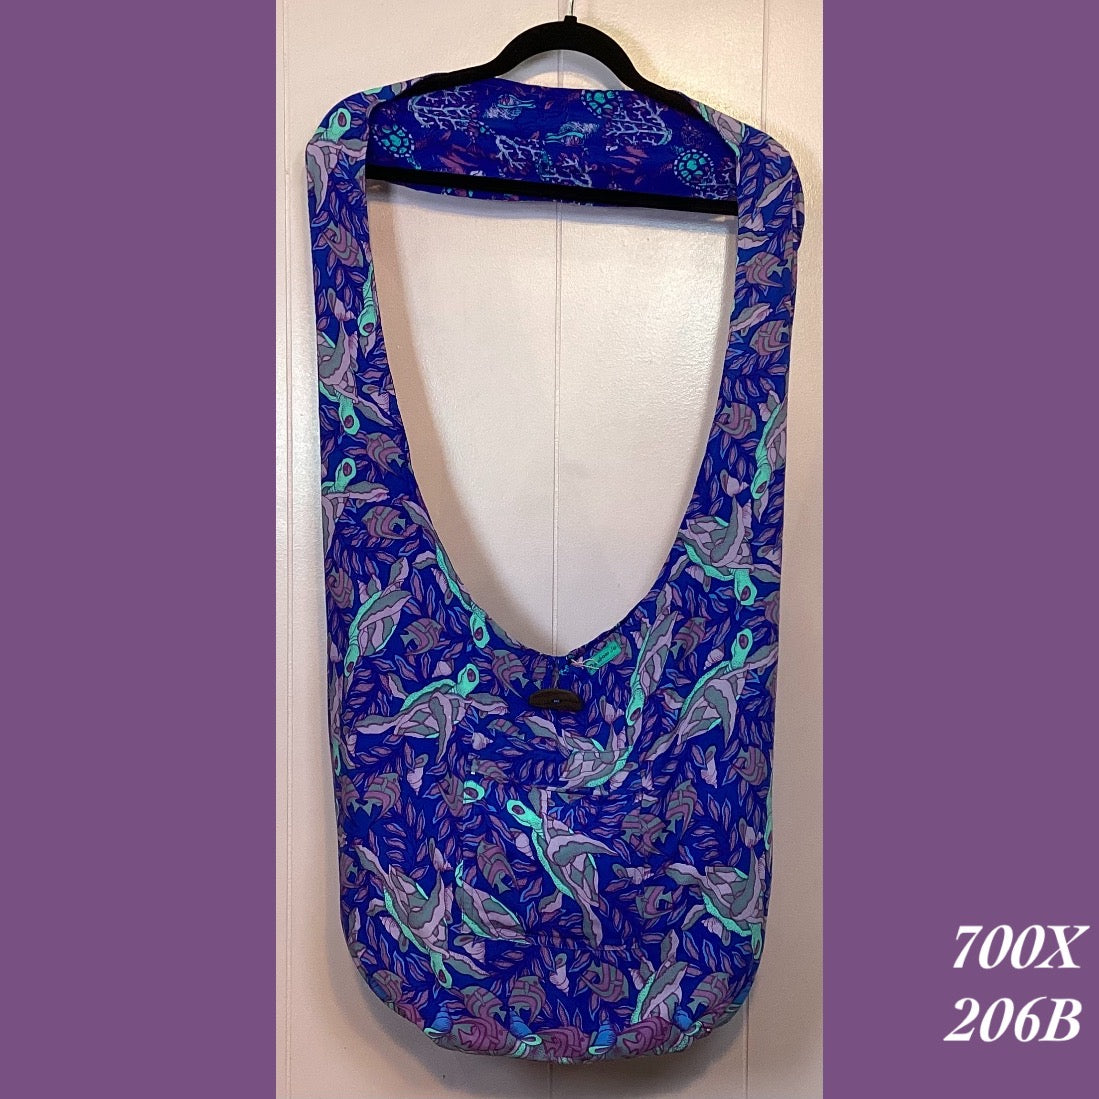 700X - 206B , Reversible bag with zippered pocket both sides plus size